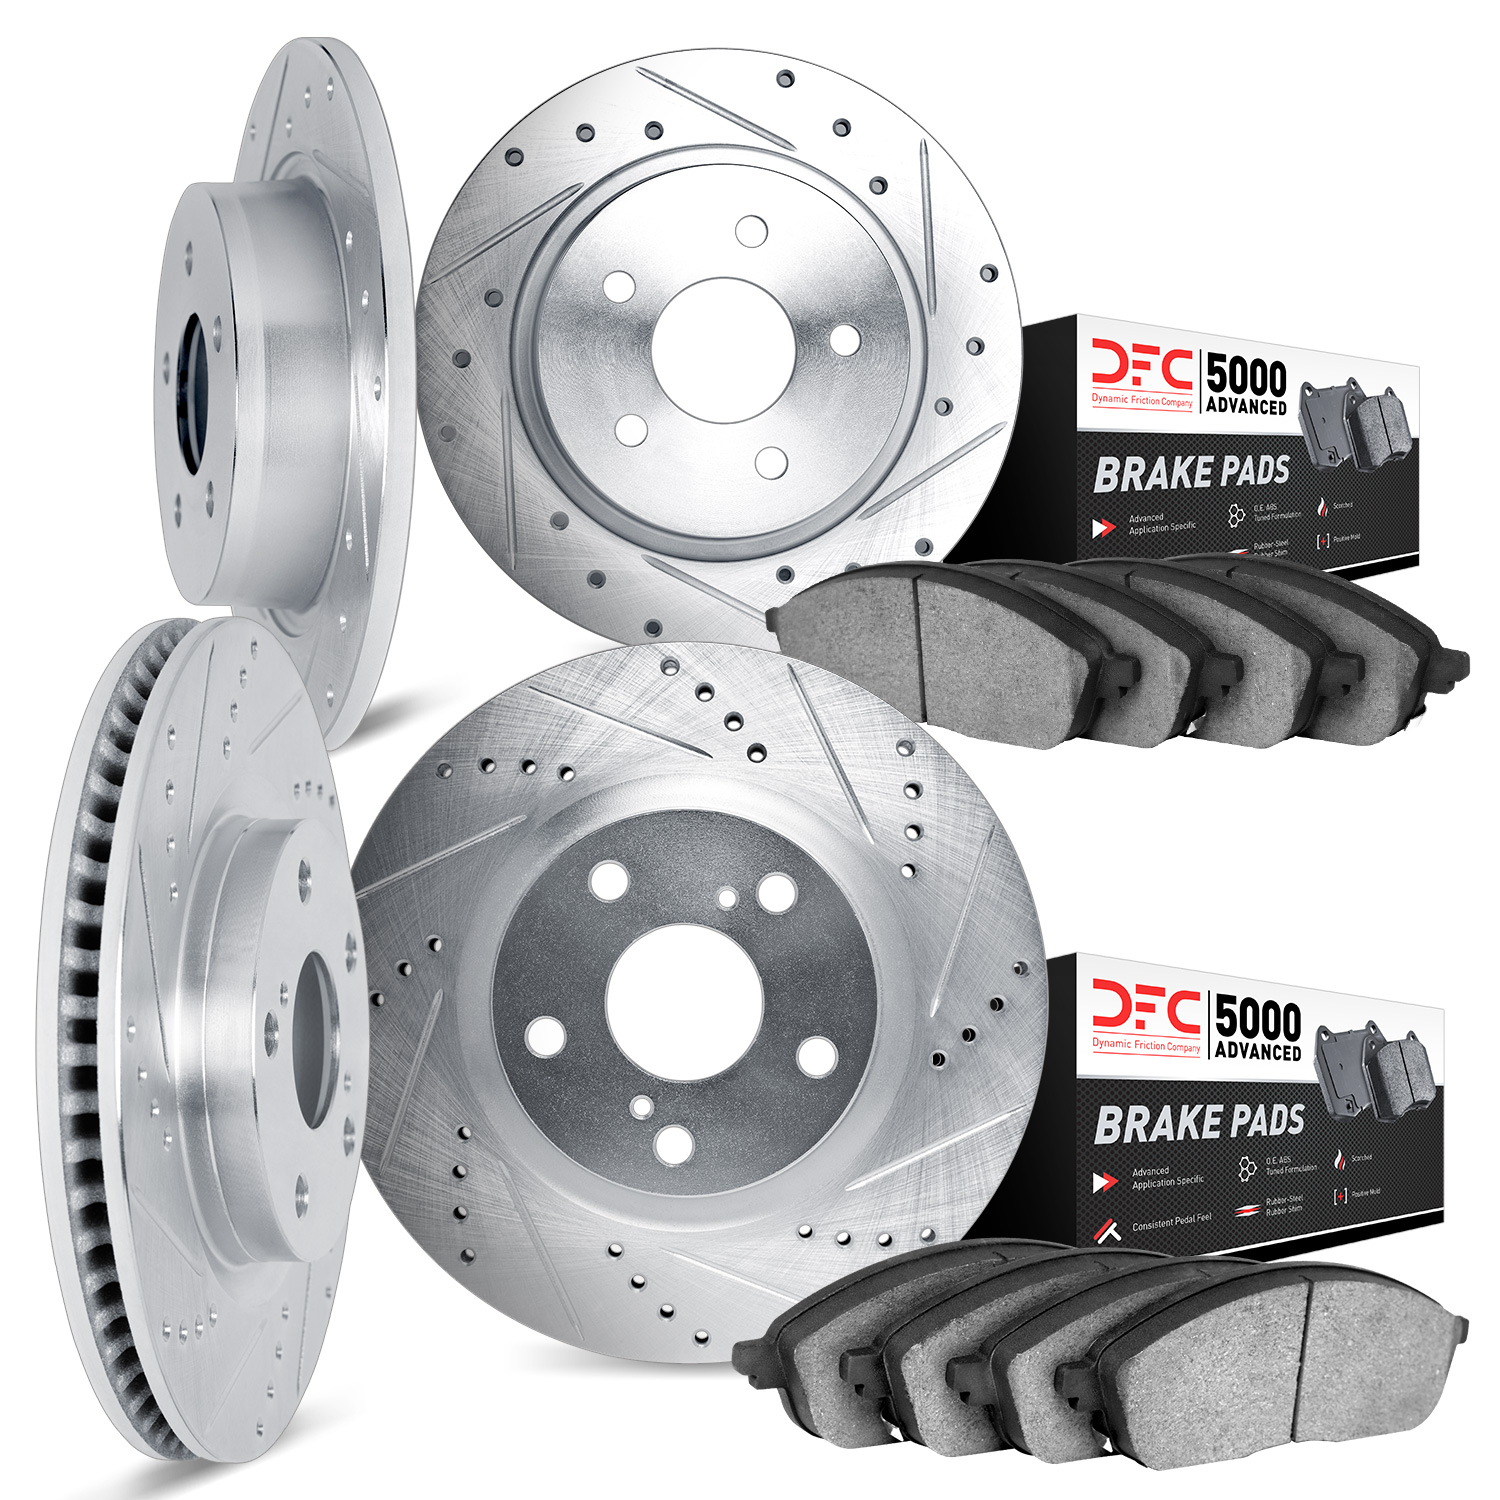 7504-67096 Drilled/Slotted Brake Rotors w/5000 Advanced Brake Pads Kit [Silver], 2002-2006 Infiniti/Nissan, Position: Front and